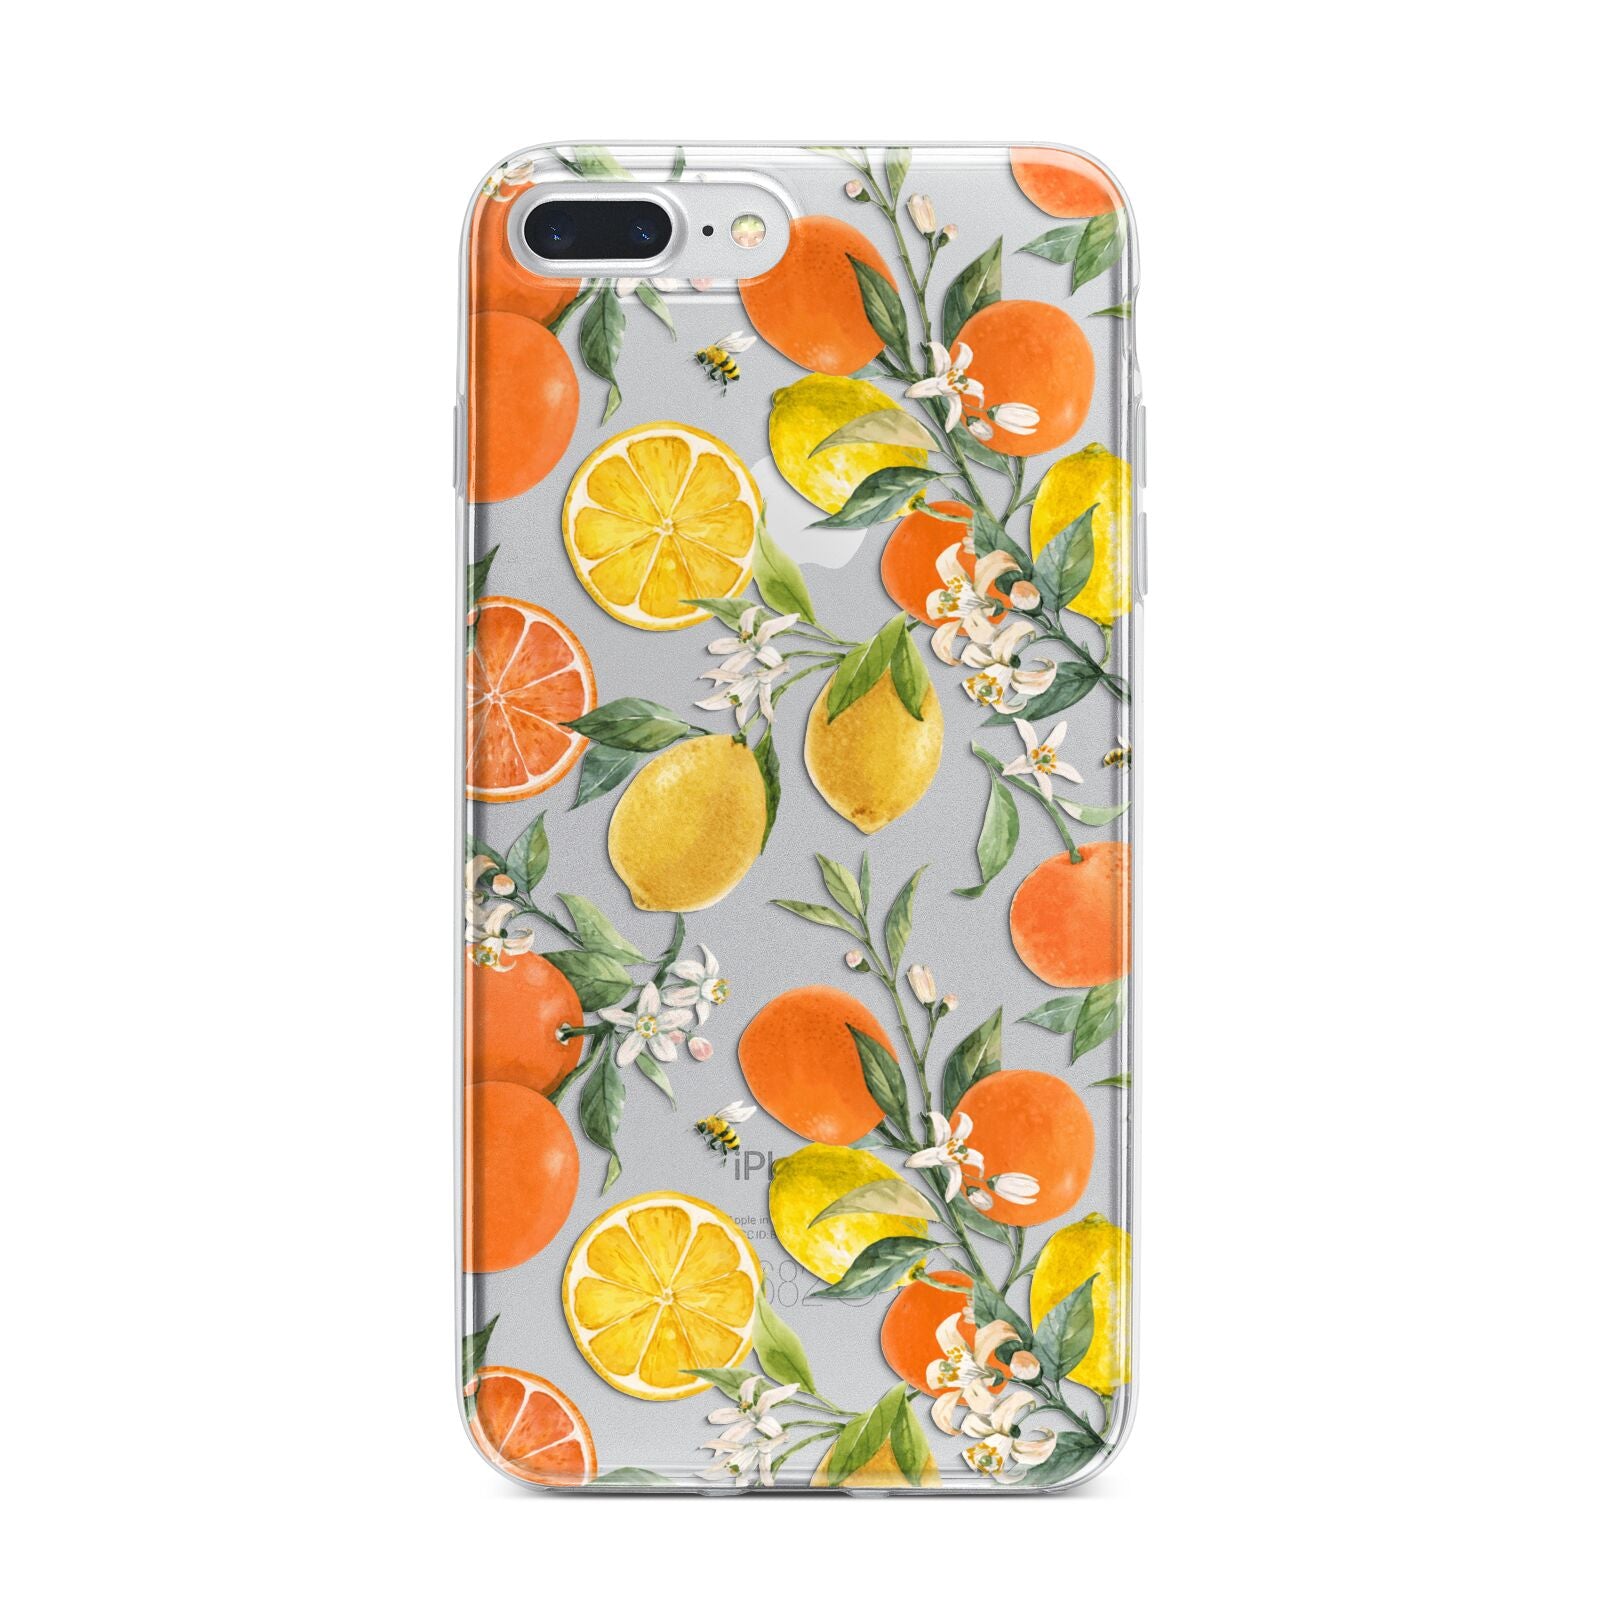 Lemons and Oranges iPhone 7 Plus Bumper Case on Silver iPhone